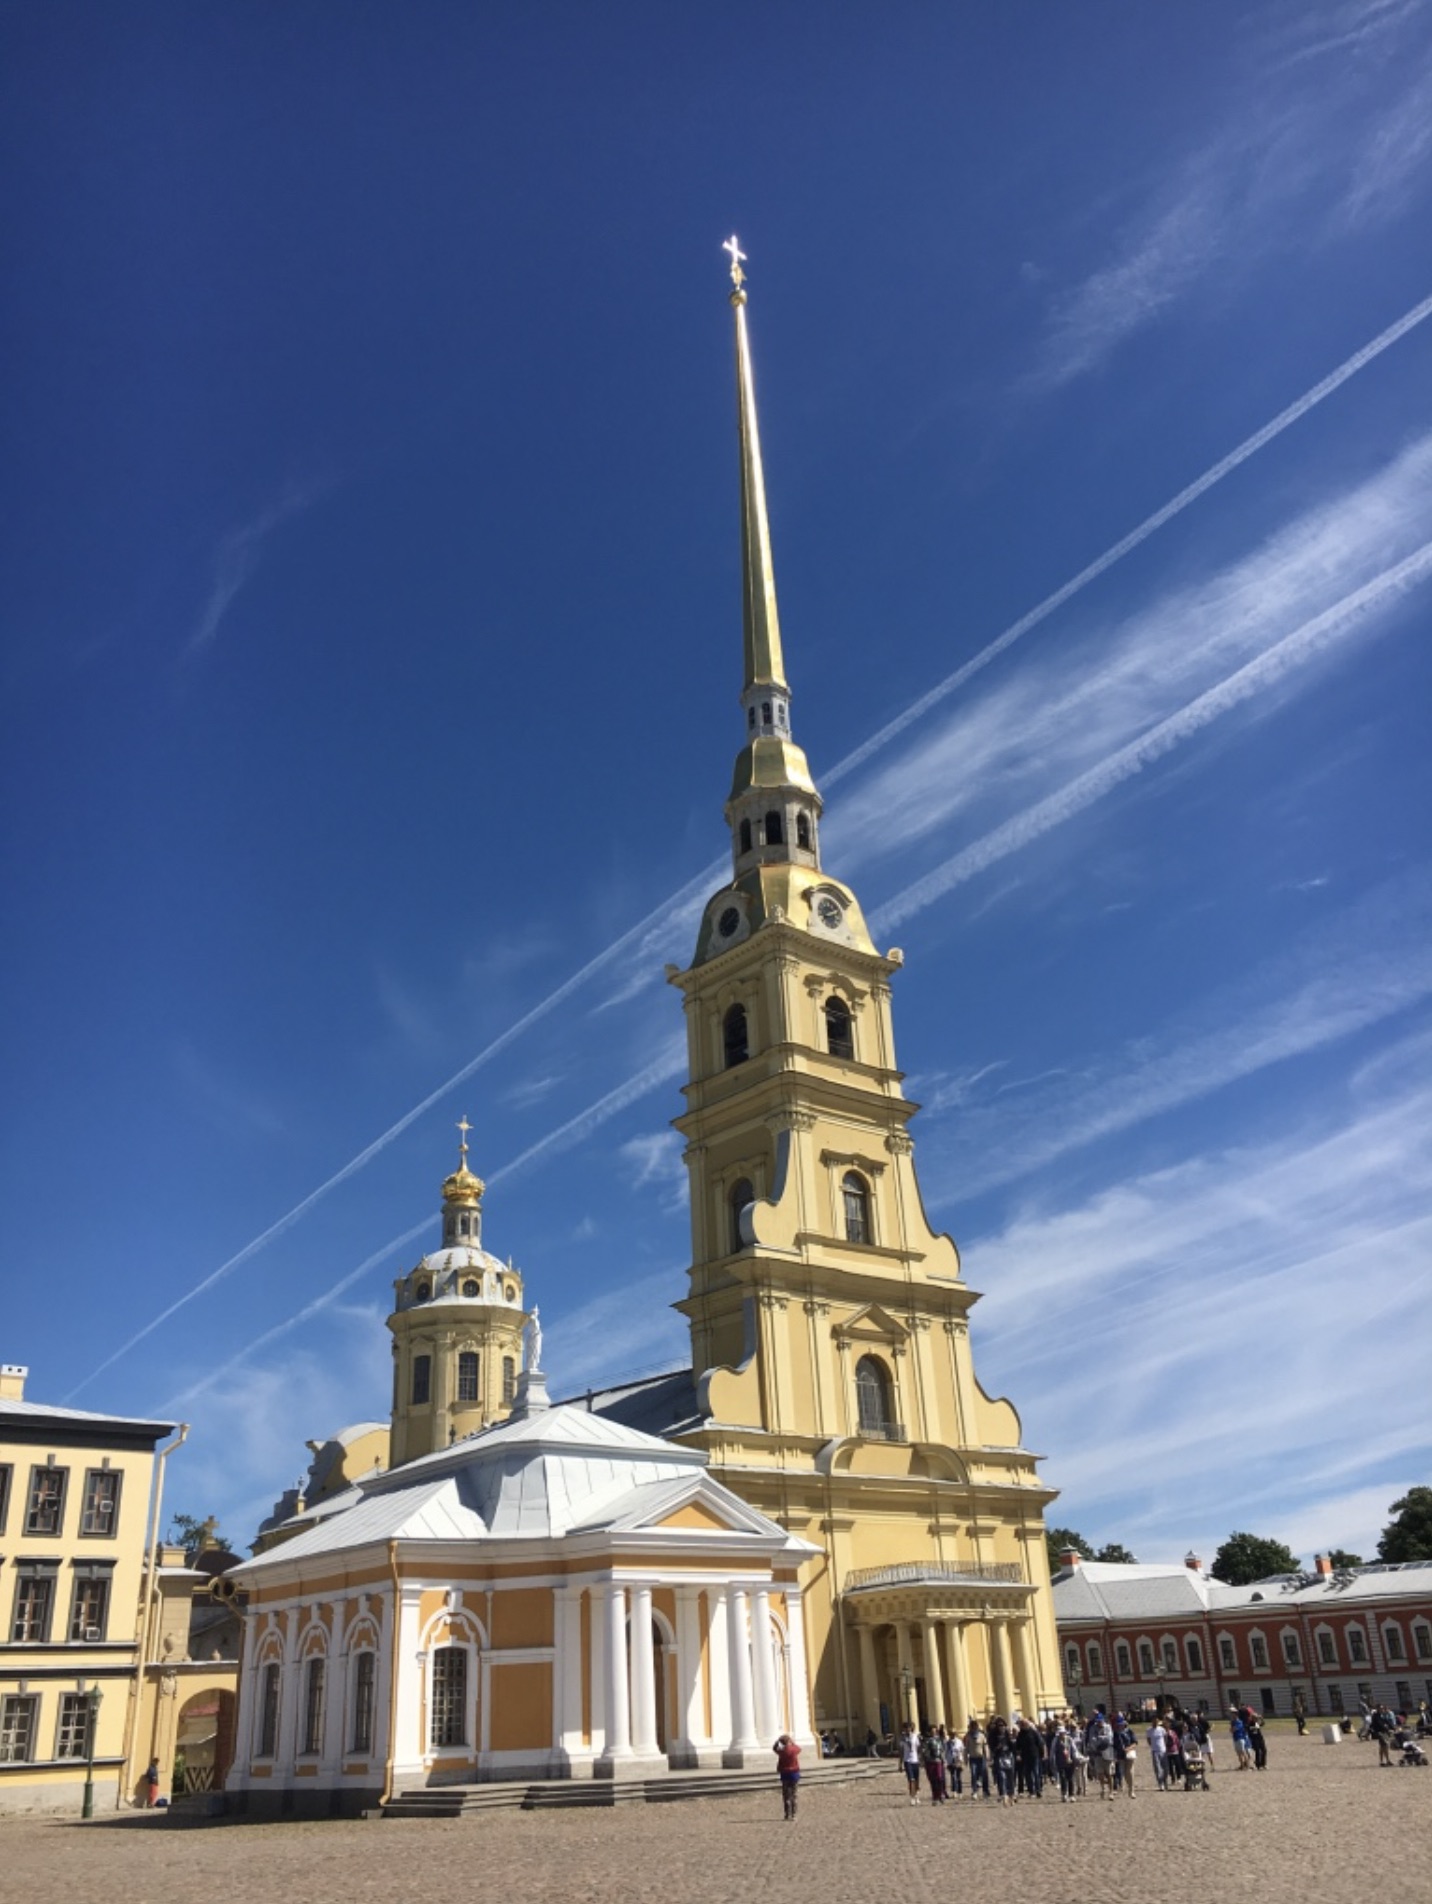 yellow building with tall tower and spire against blue sky with light clouds